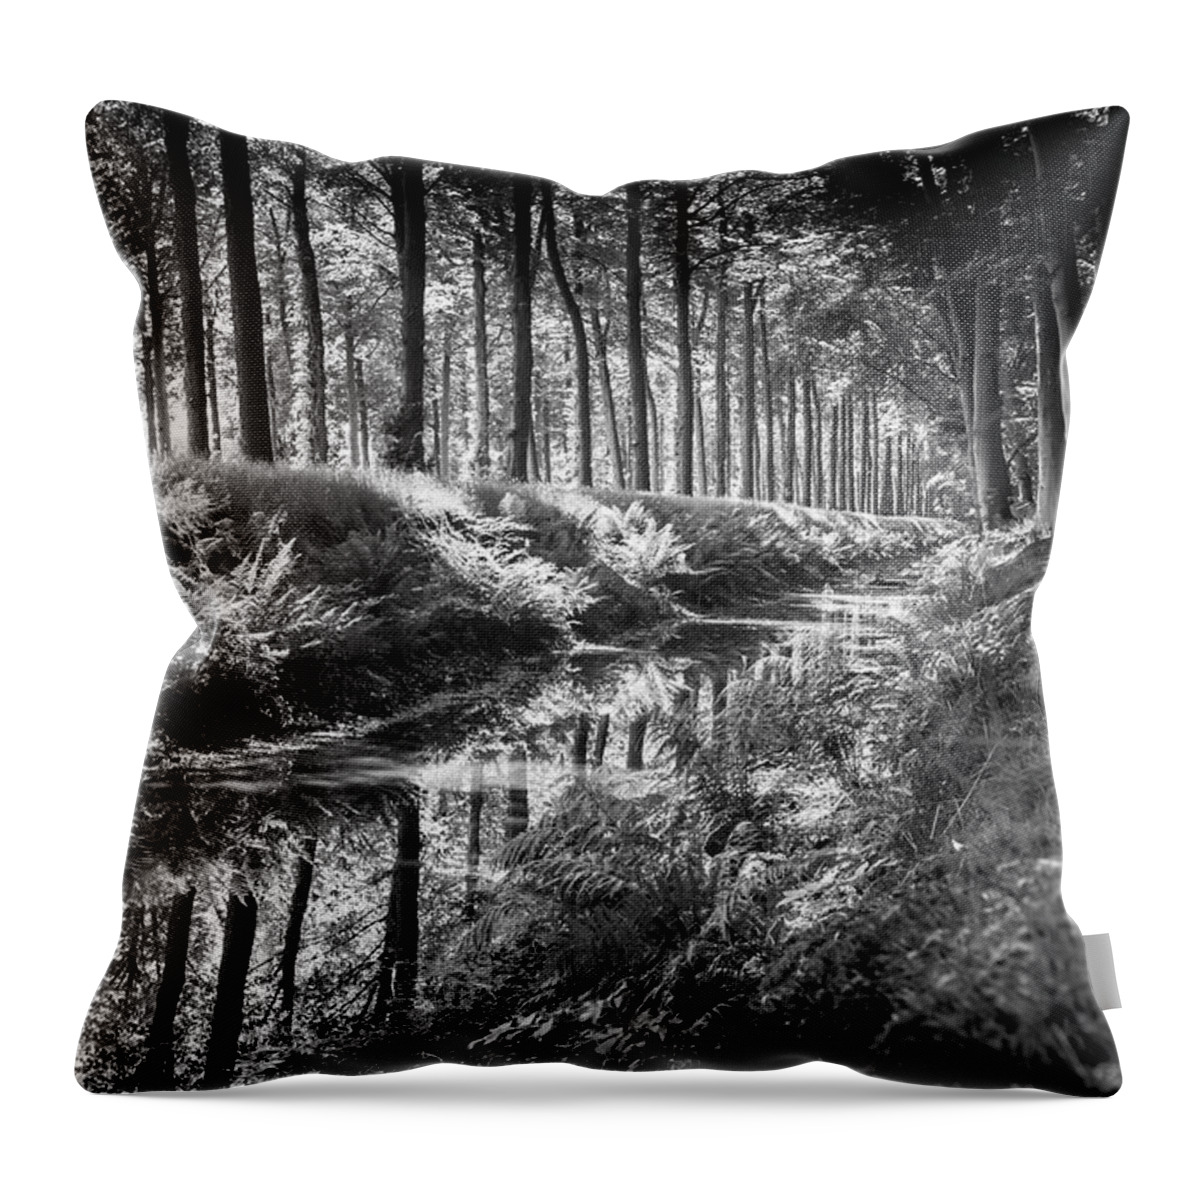 Black&white Throw Pillow featuring the photograph Forest by MPhotographer